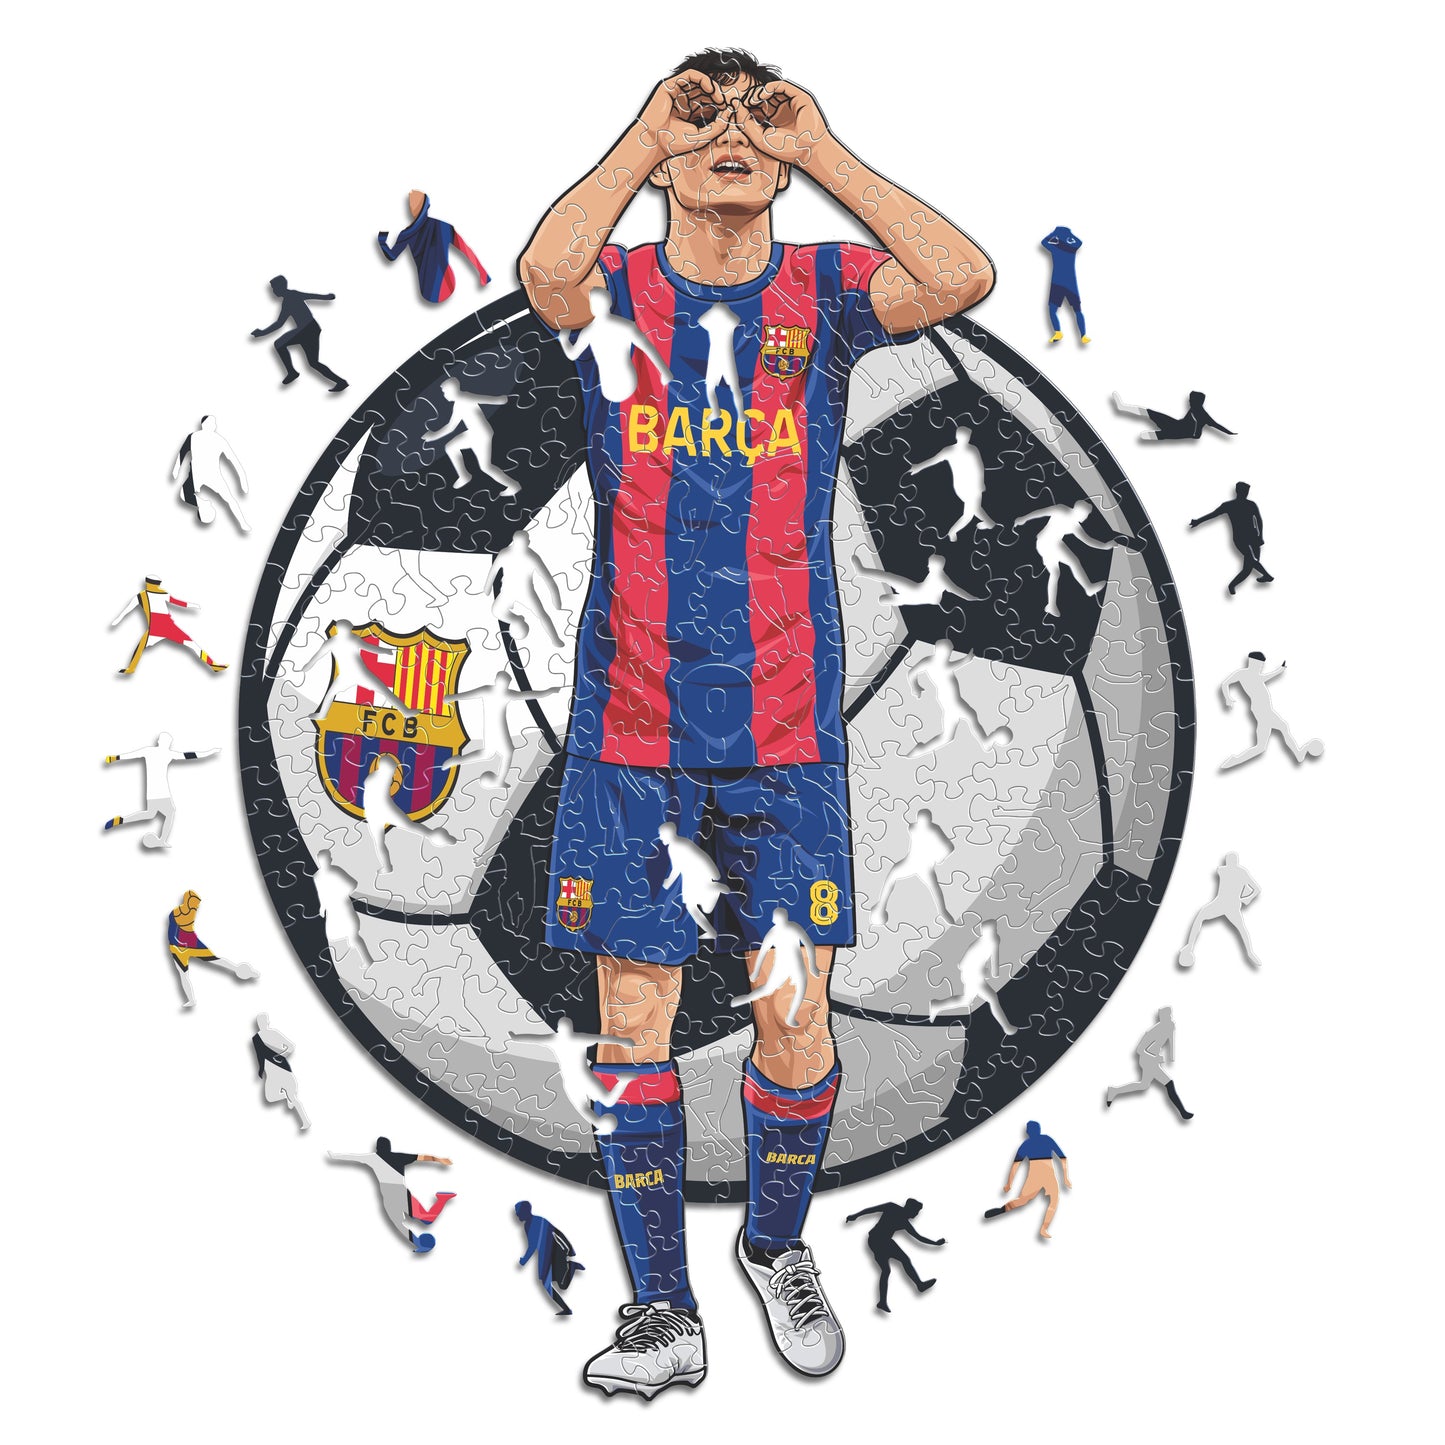 3 Soccer Players Puzzles Of Your Choice